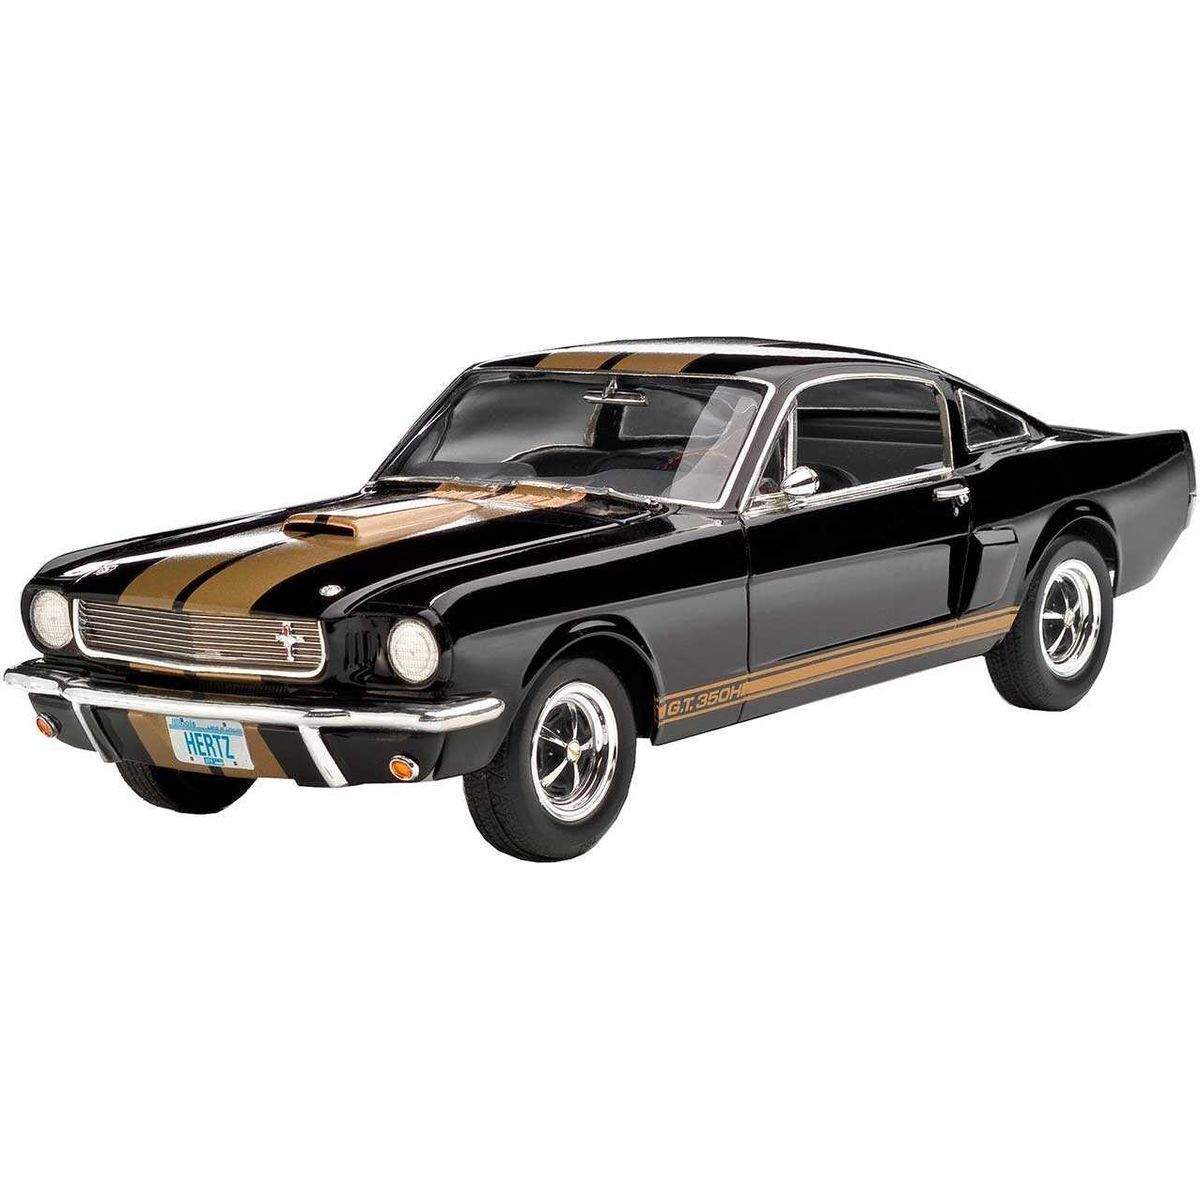 Revell ModelSet auto 67242 Shelby Mustang GT 350 1:24